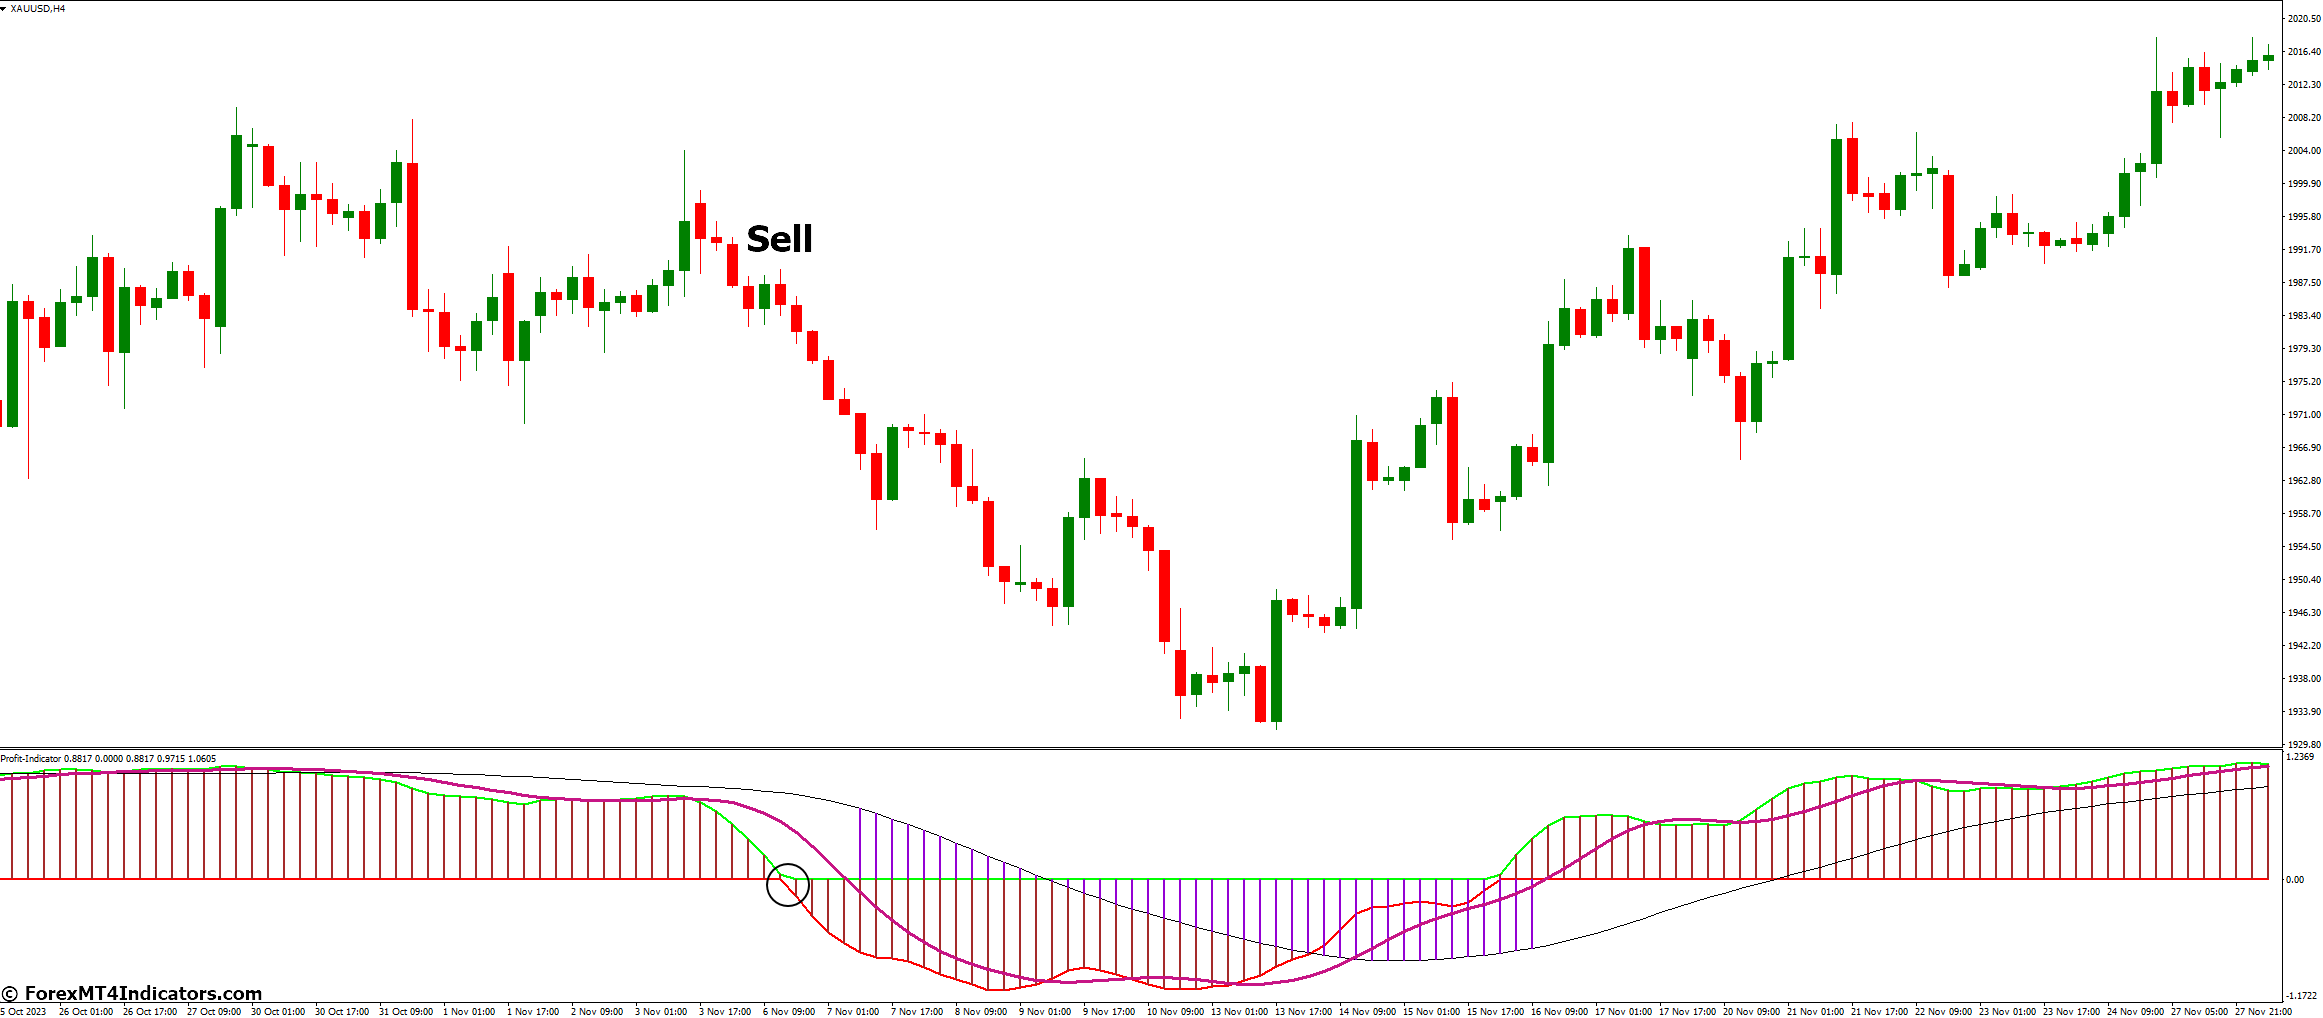 How to Trade with Profit MT4 Indicator - Sell Entry